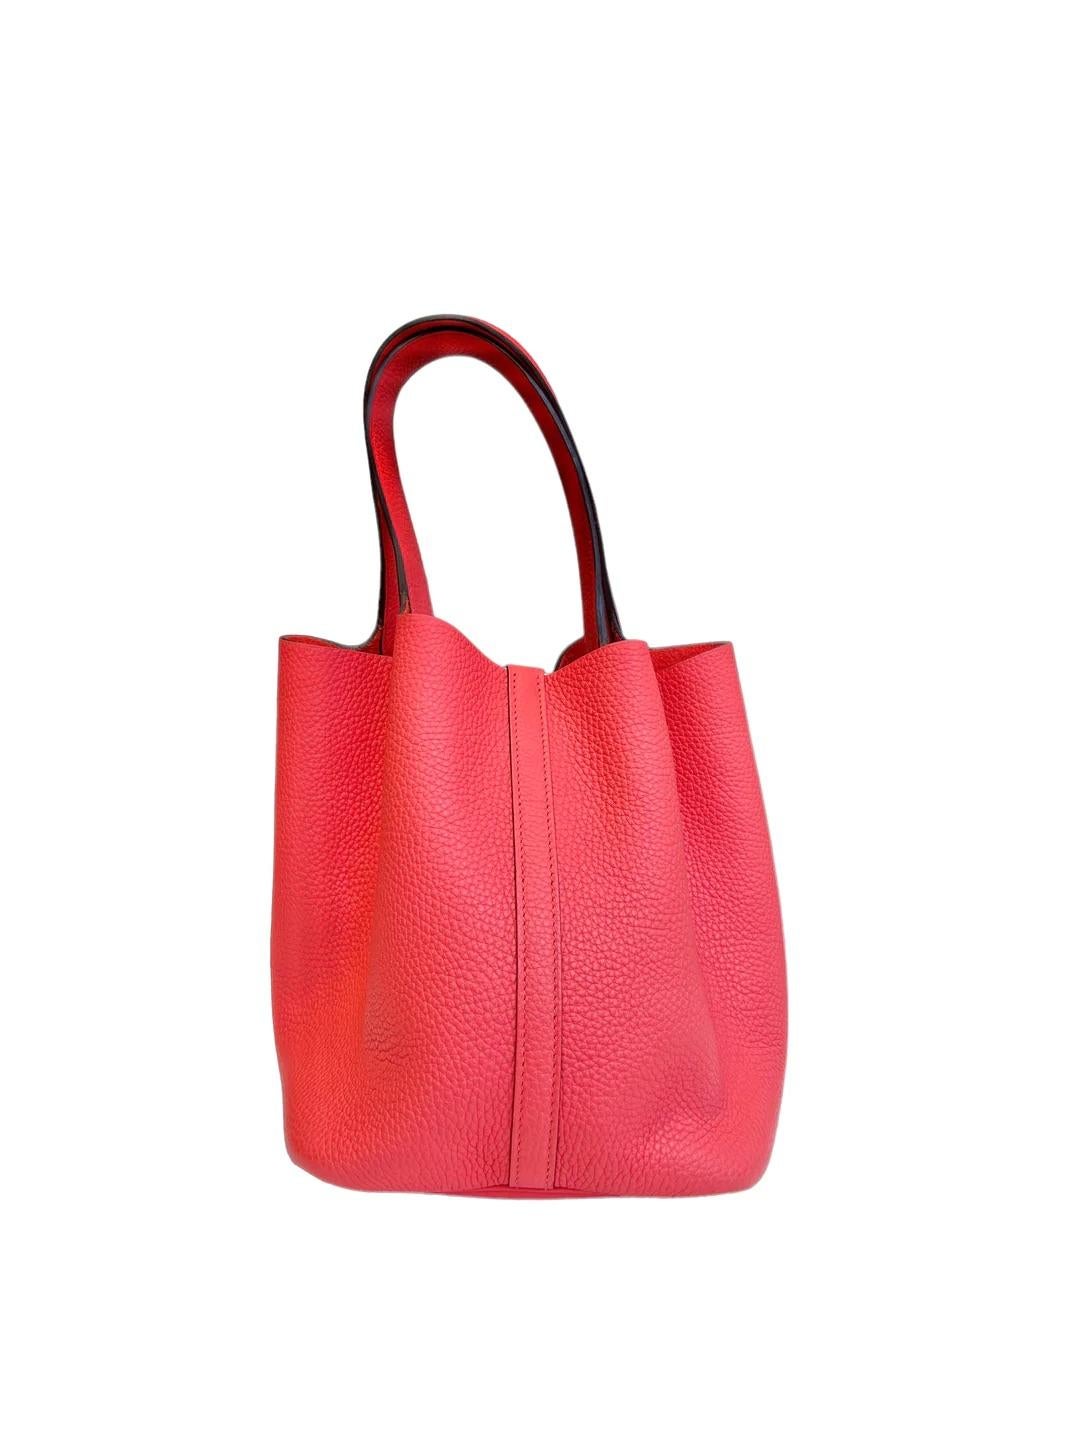 Hermes PICOTIN 22 LEATHER HANDBAG 0E ROSE TEXAS Full set with box 

Condition: Good, like new 
Colour: Red/Orange
Season: All
Material: leather
Box : Yes
Dust bag: Yes 
Lock Pouch: Yes

The Hermes Picotin 22 is a classic tote bag that is perfect for